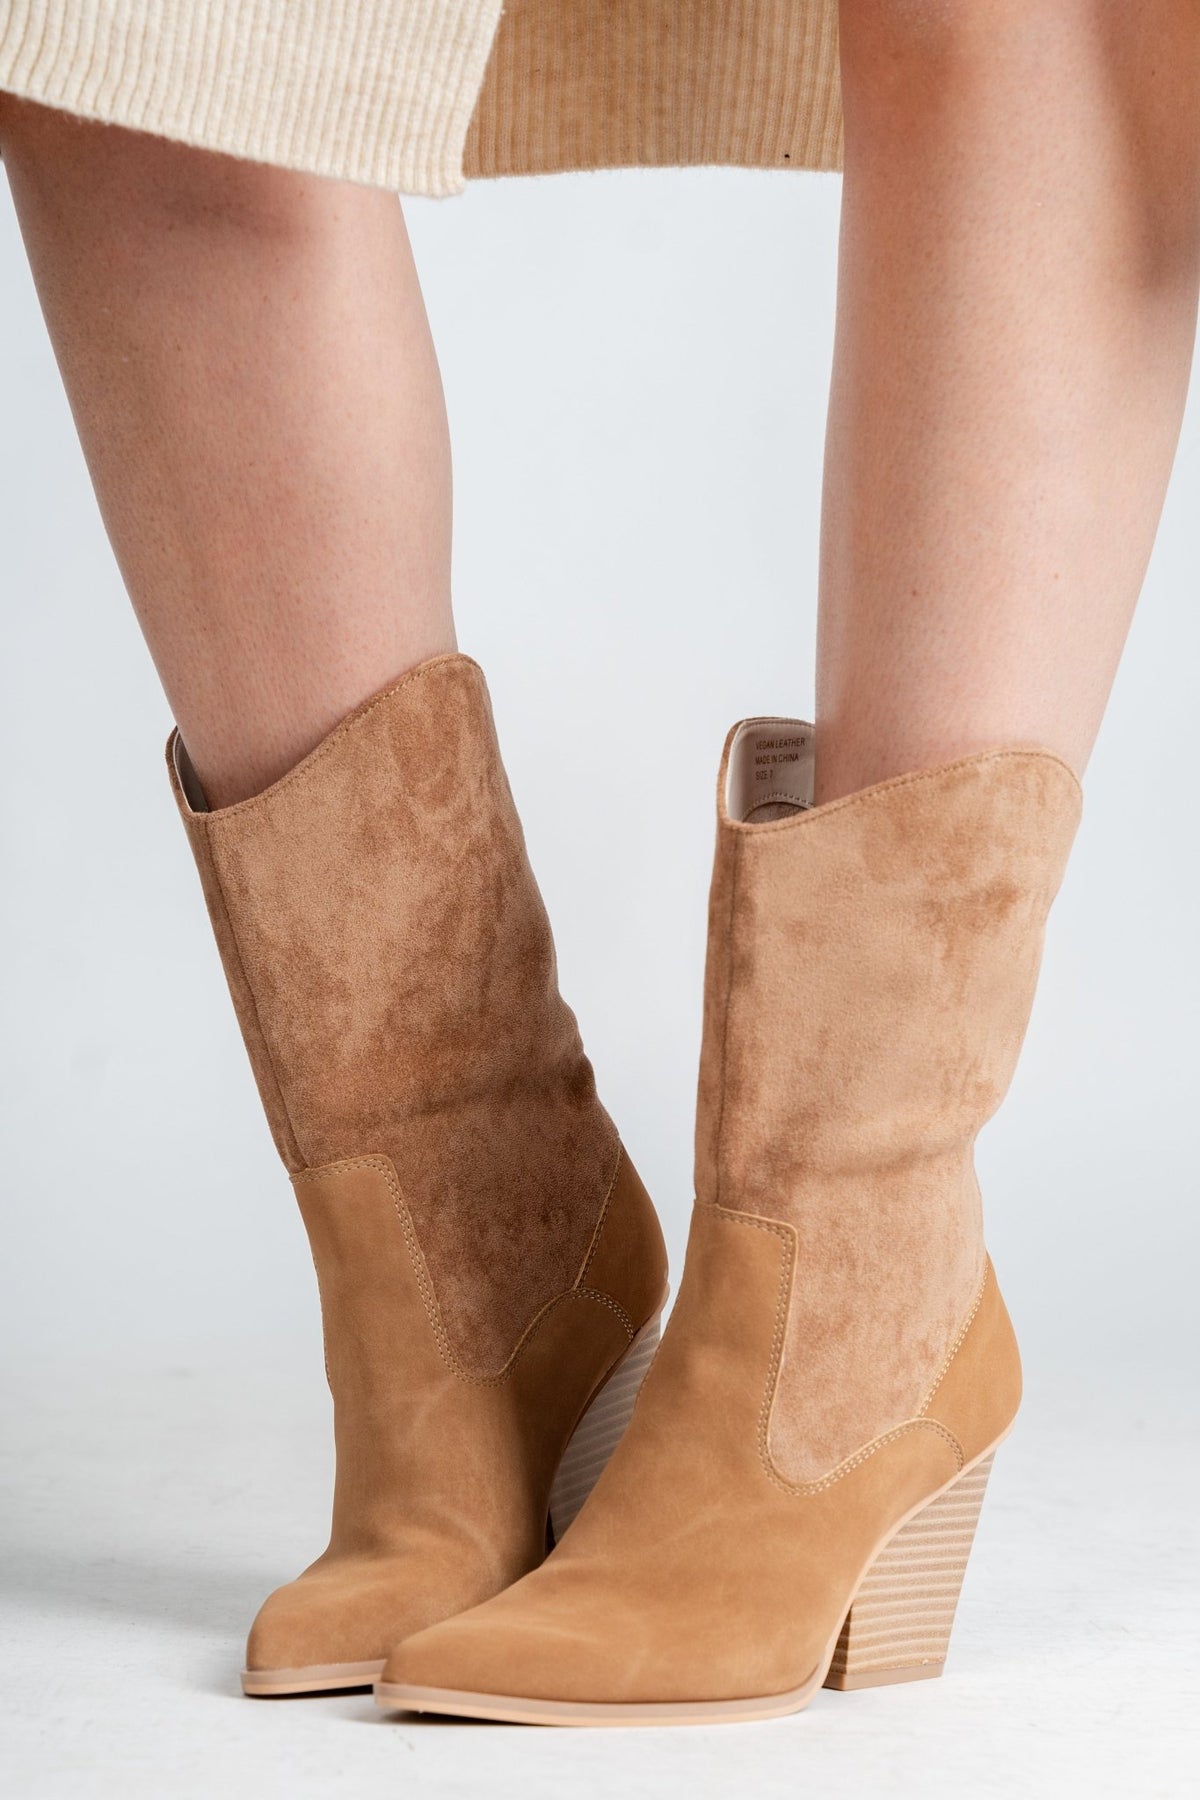 Marseille loose fit boot camel - Cute shoes - Trendy Shoes at Lush Fashion Lounge Boutique in Oklahoma City